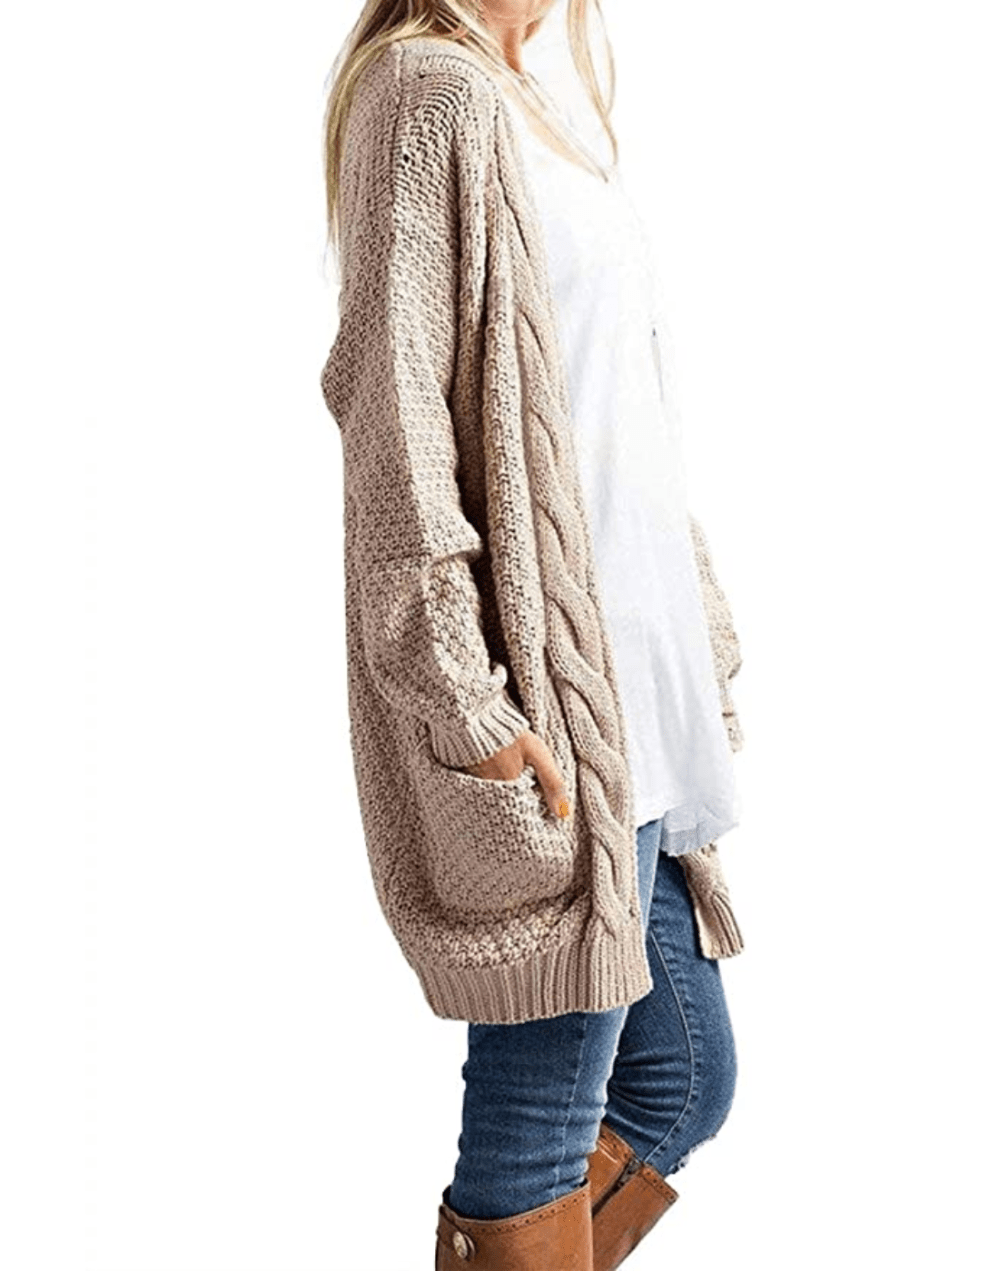 U.Vomade Women's Boho Long Sleeve Open Front Chunky Cable Knit Cardigan